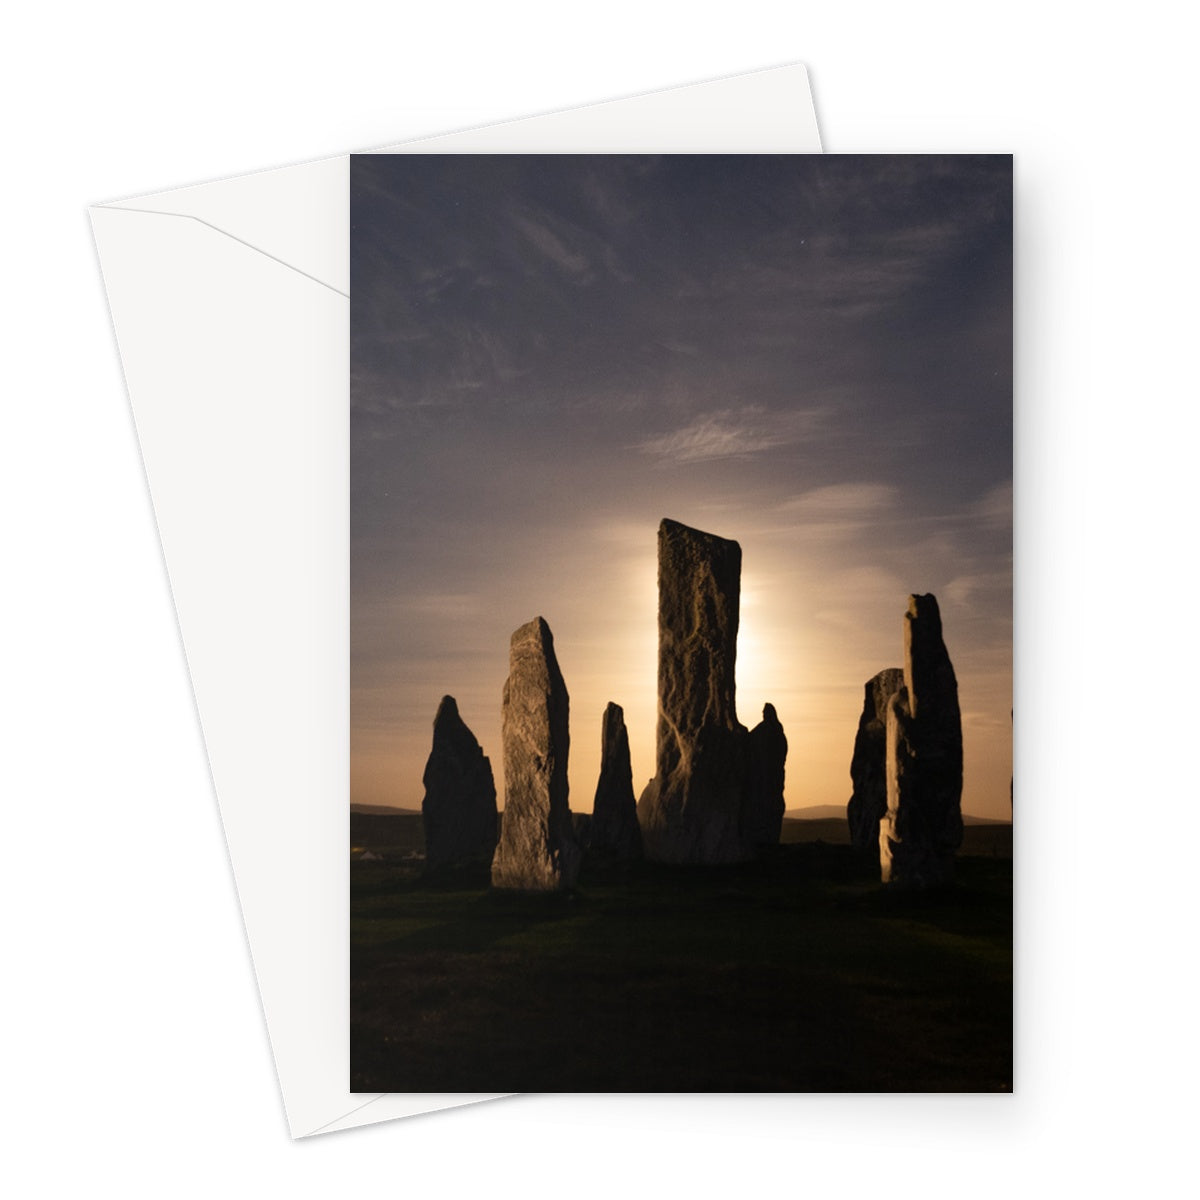 Callanish, Full Moon and Clouds Greeting Card